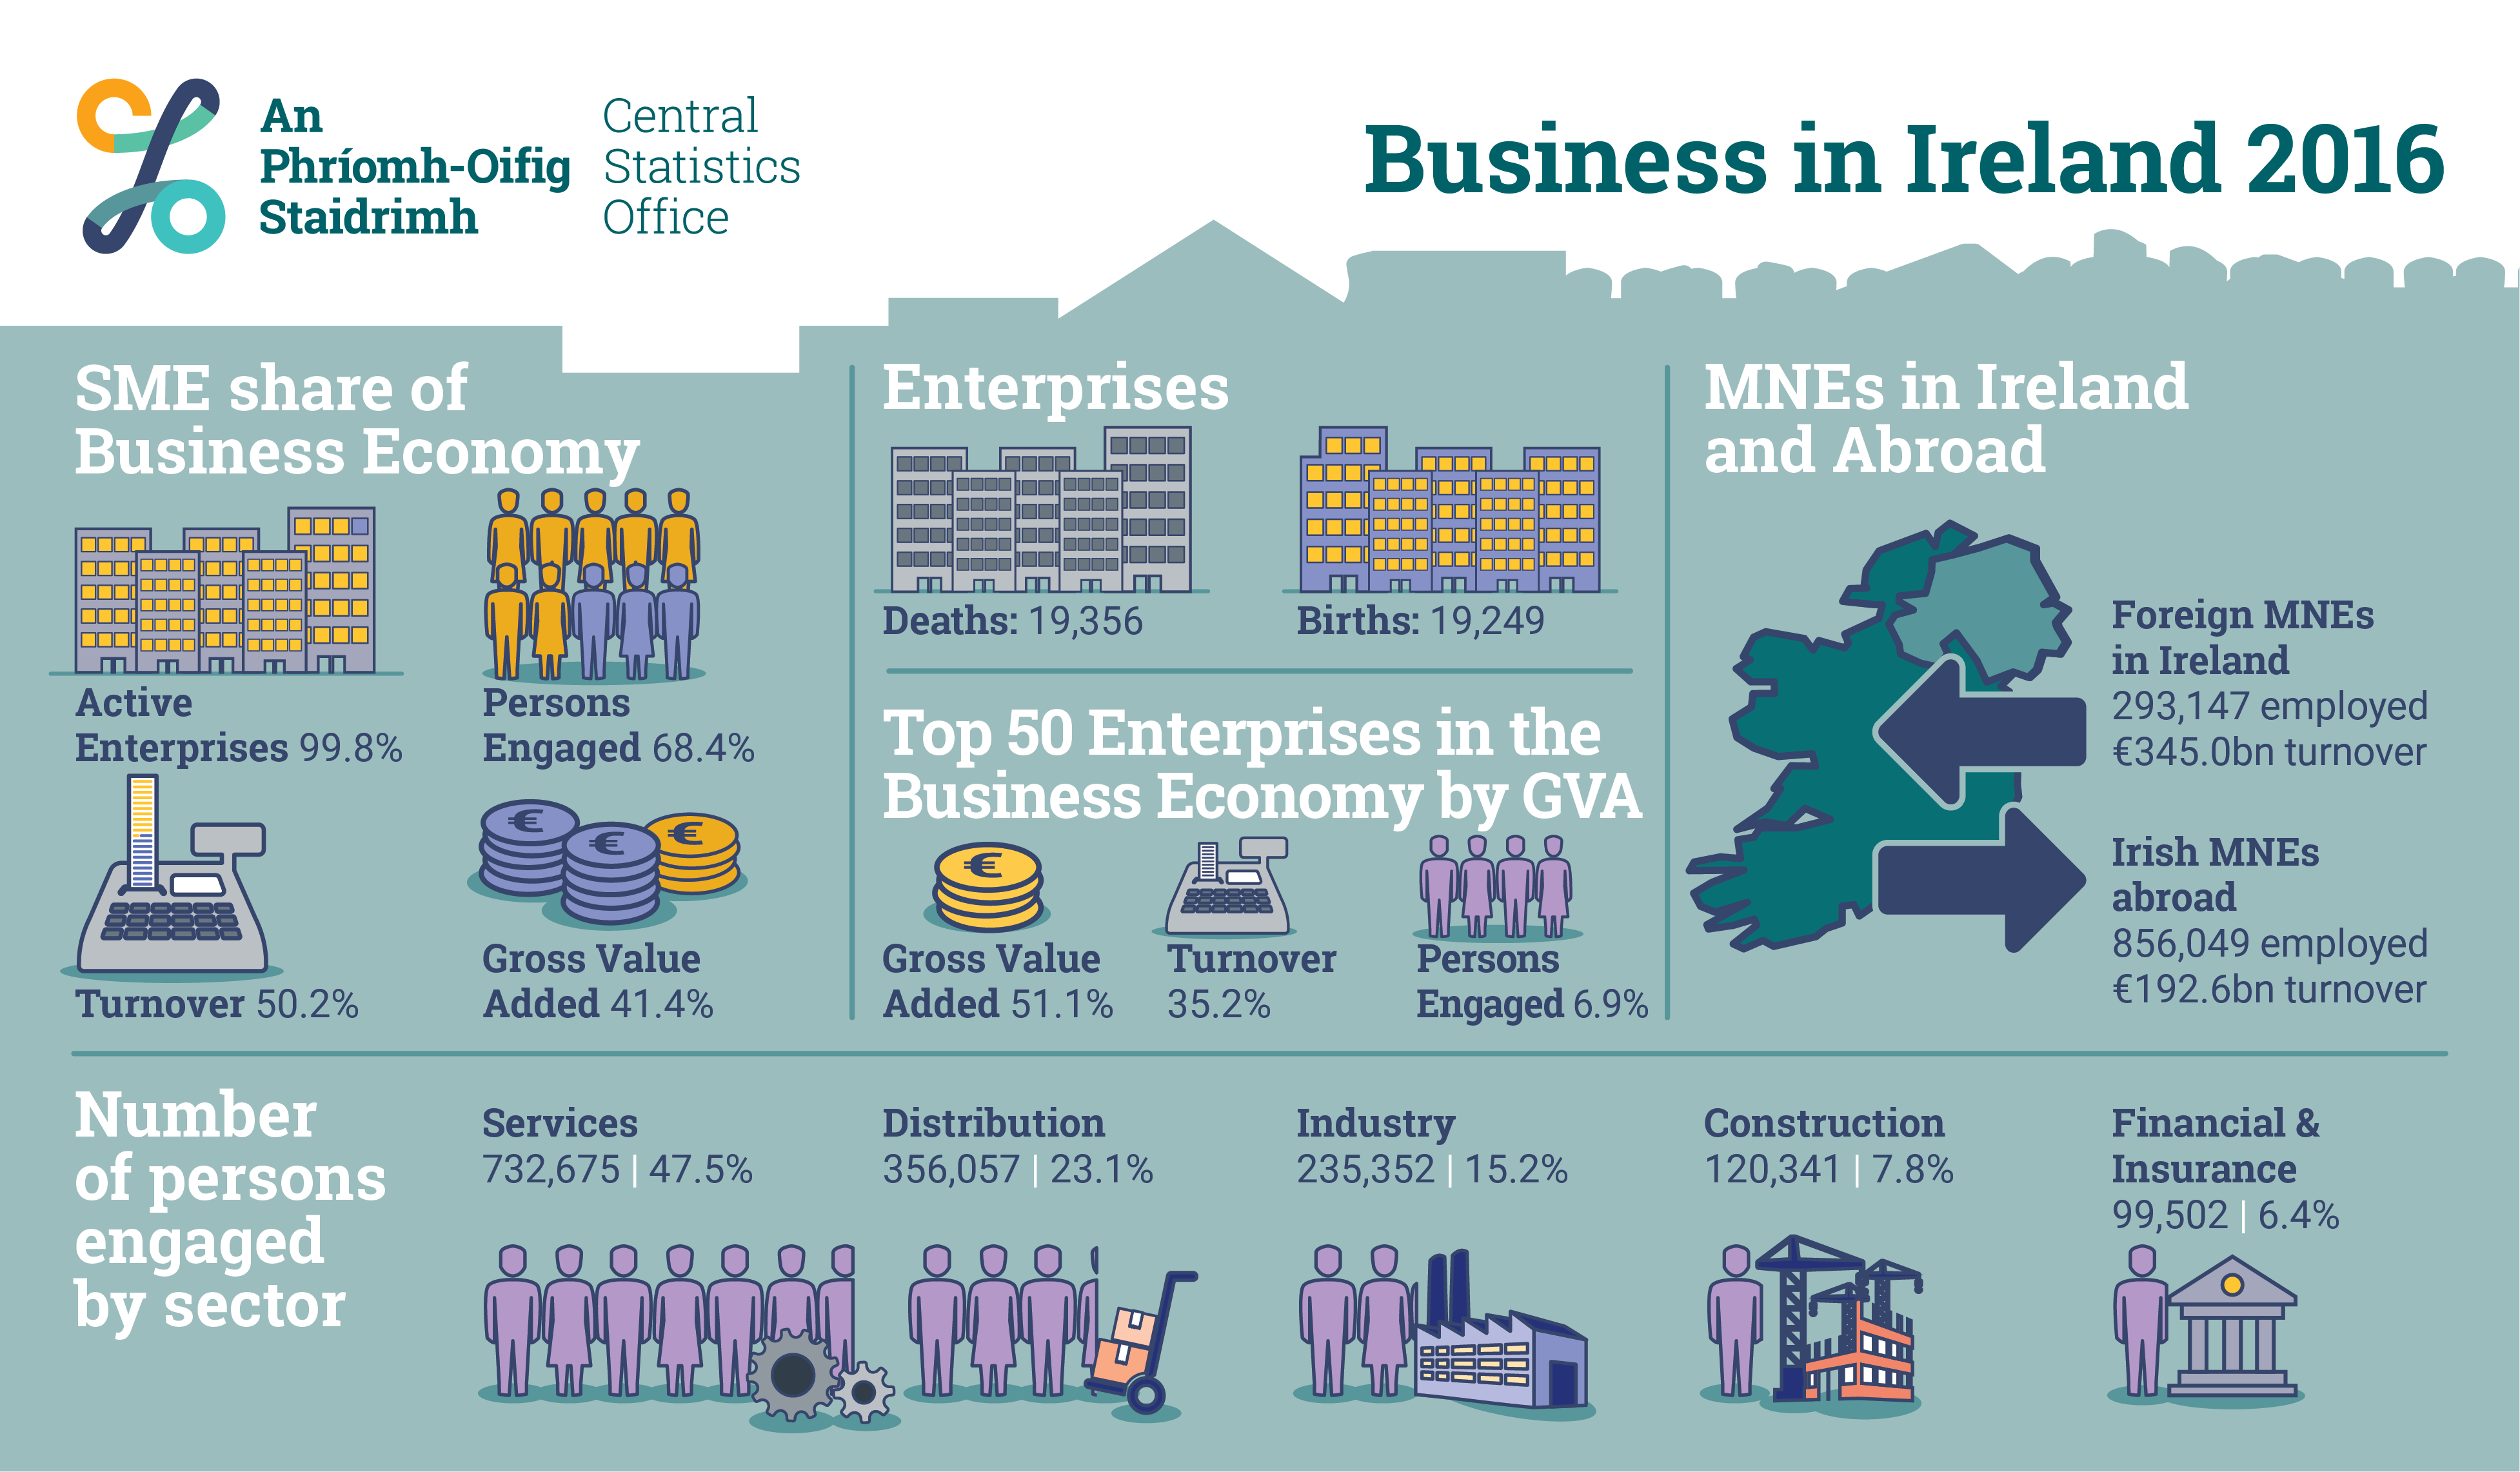 Business in Ireland 2016 Infographic image